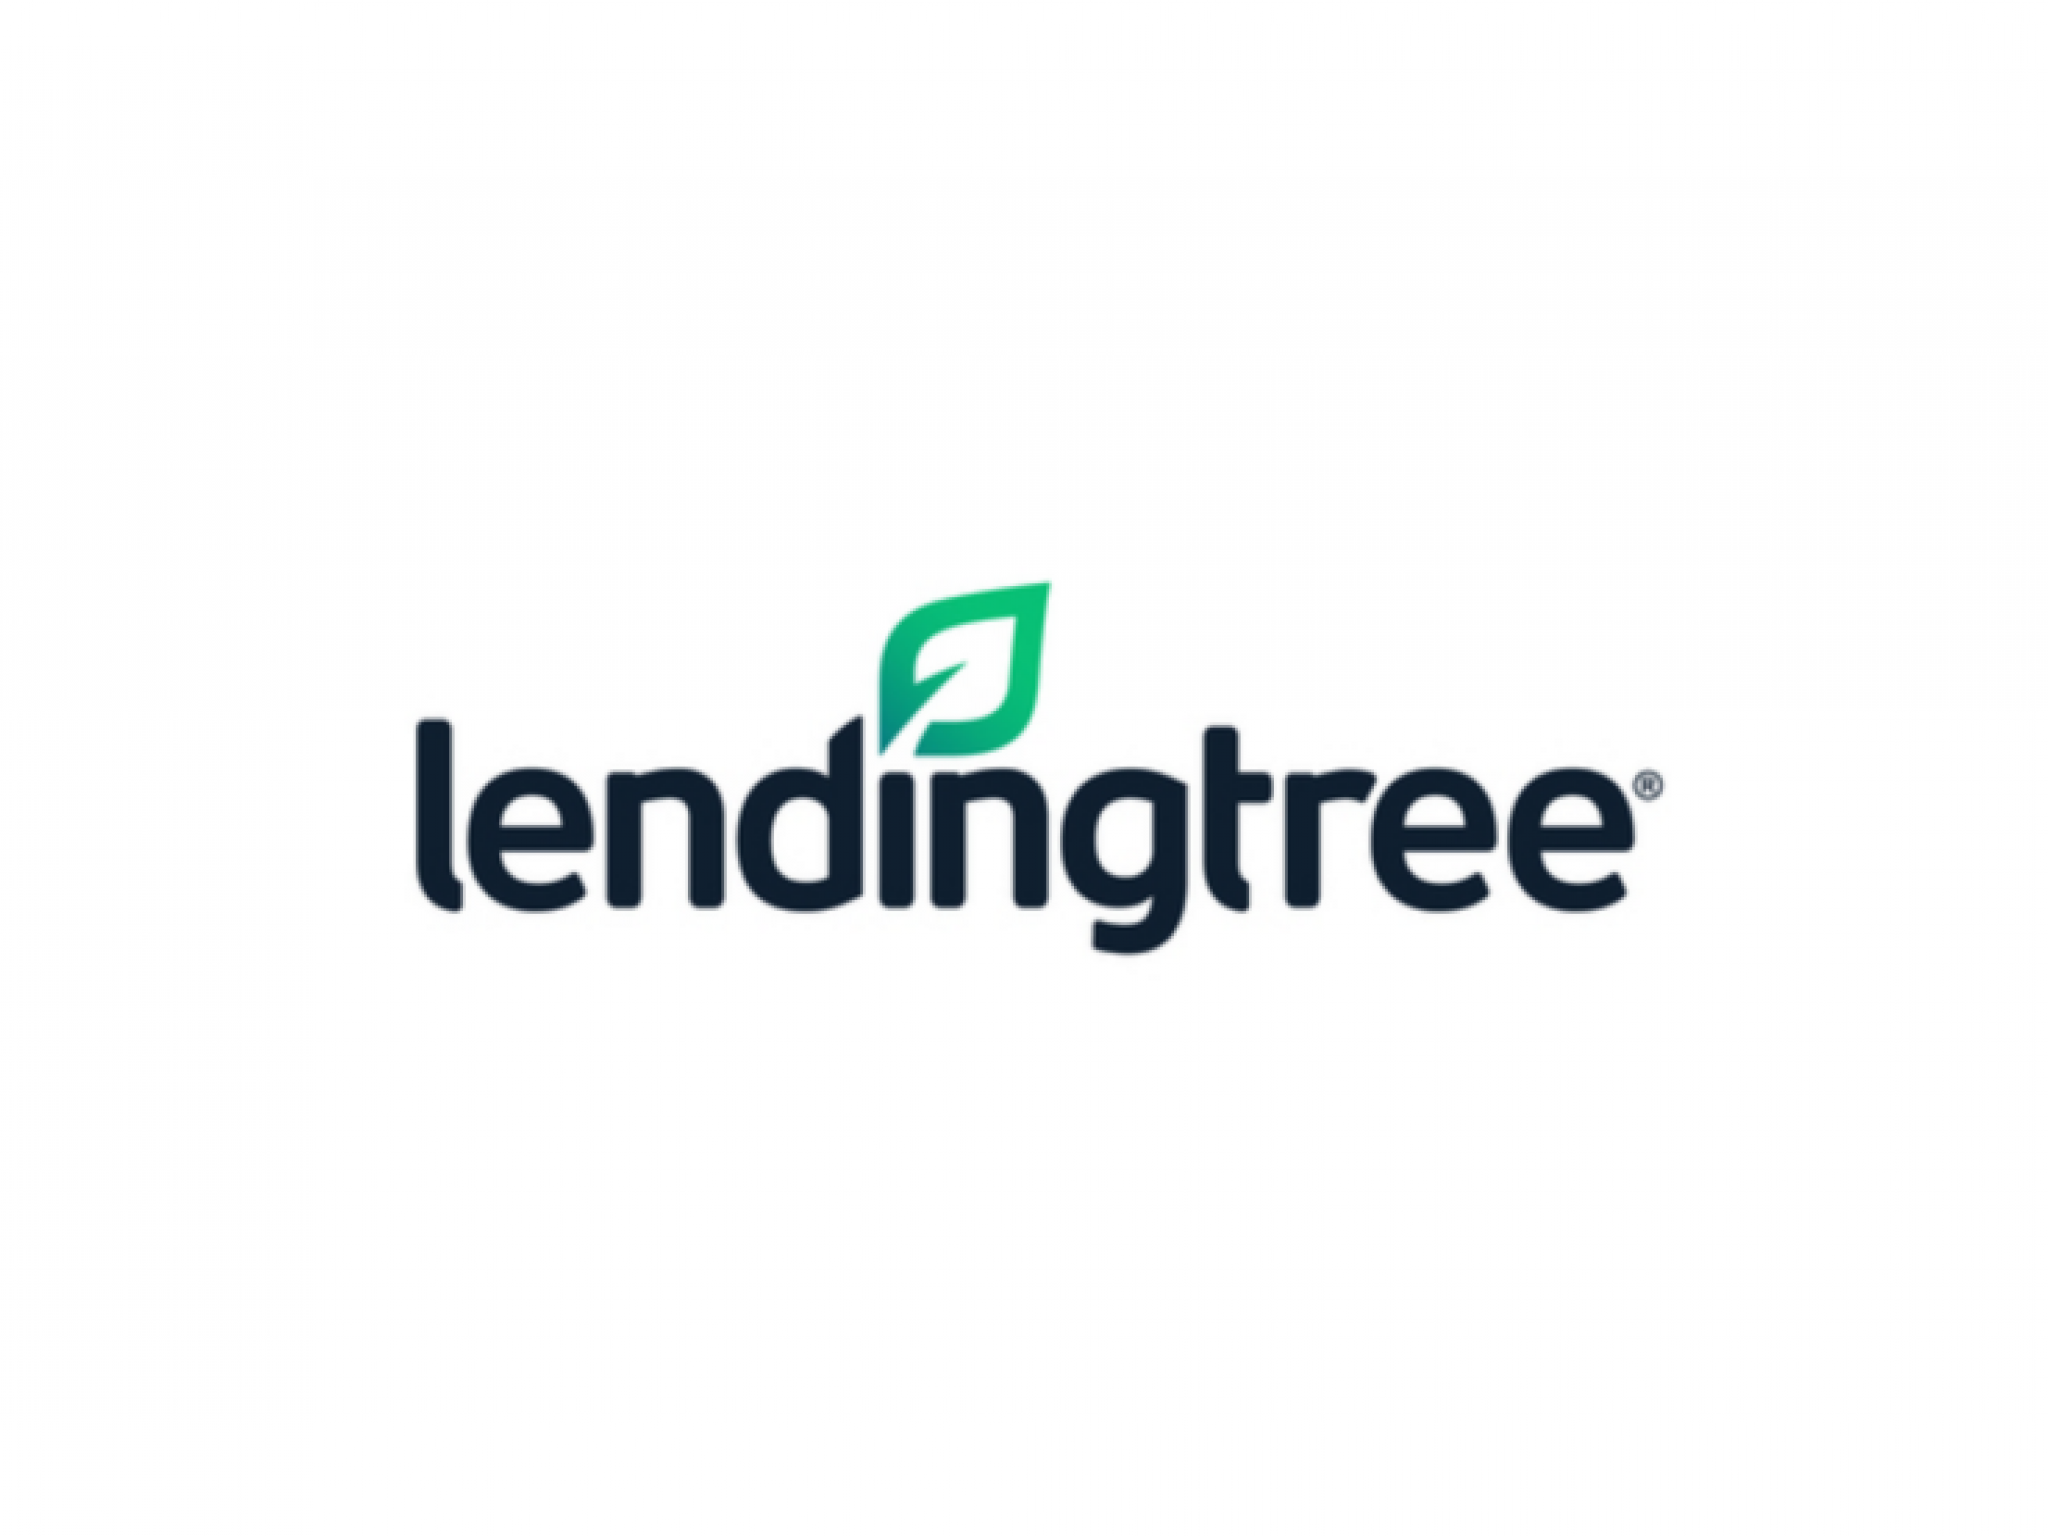  lendingtrees-growth-in-insurance-and-sem-advertising-positions-for-multi-year-cycle-says-analyst 